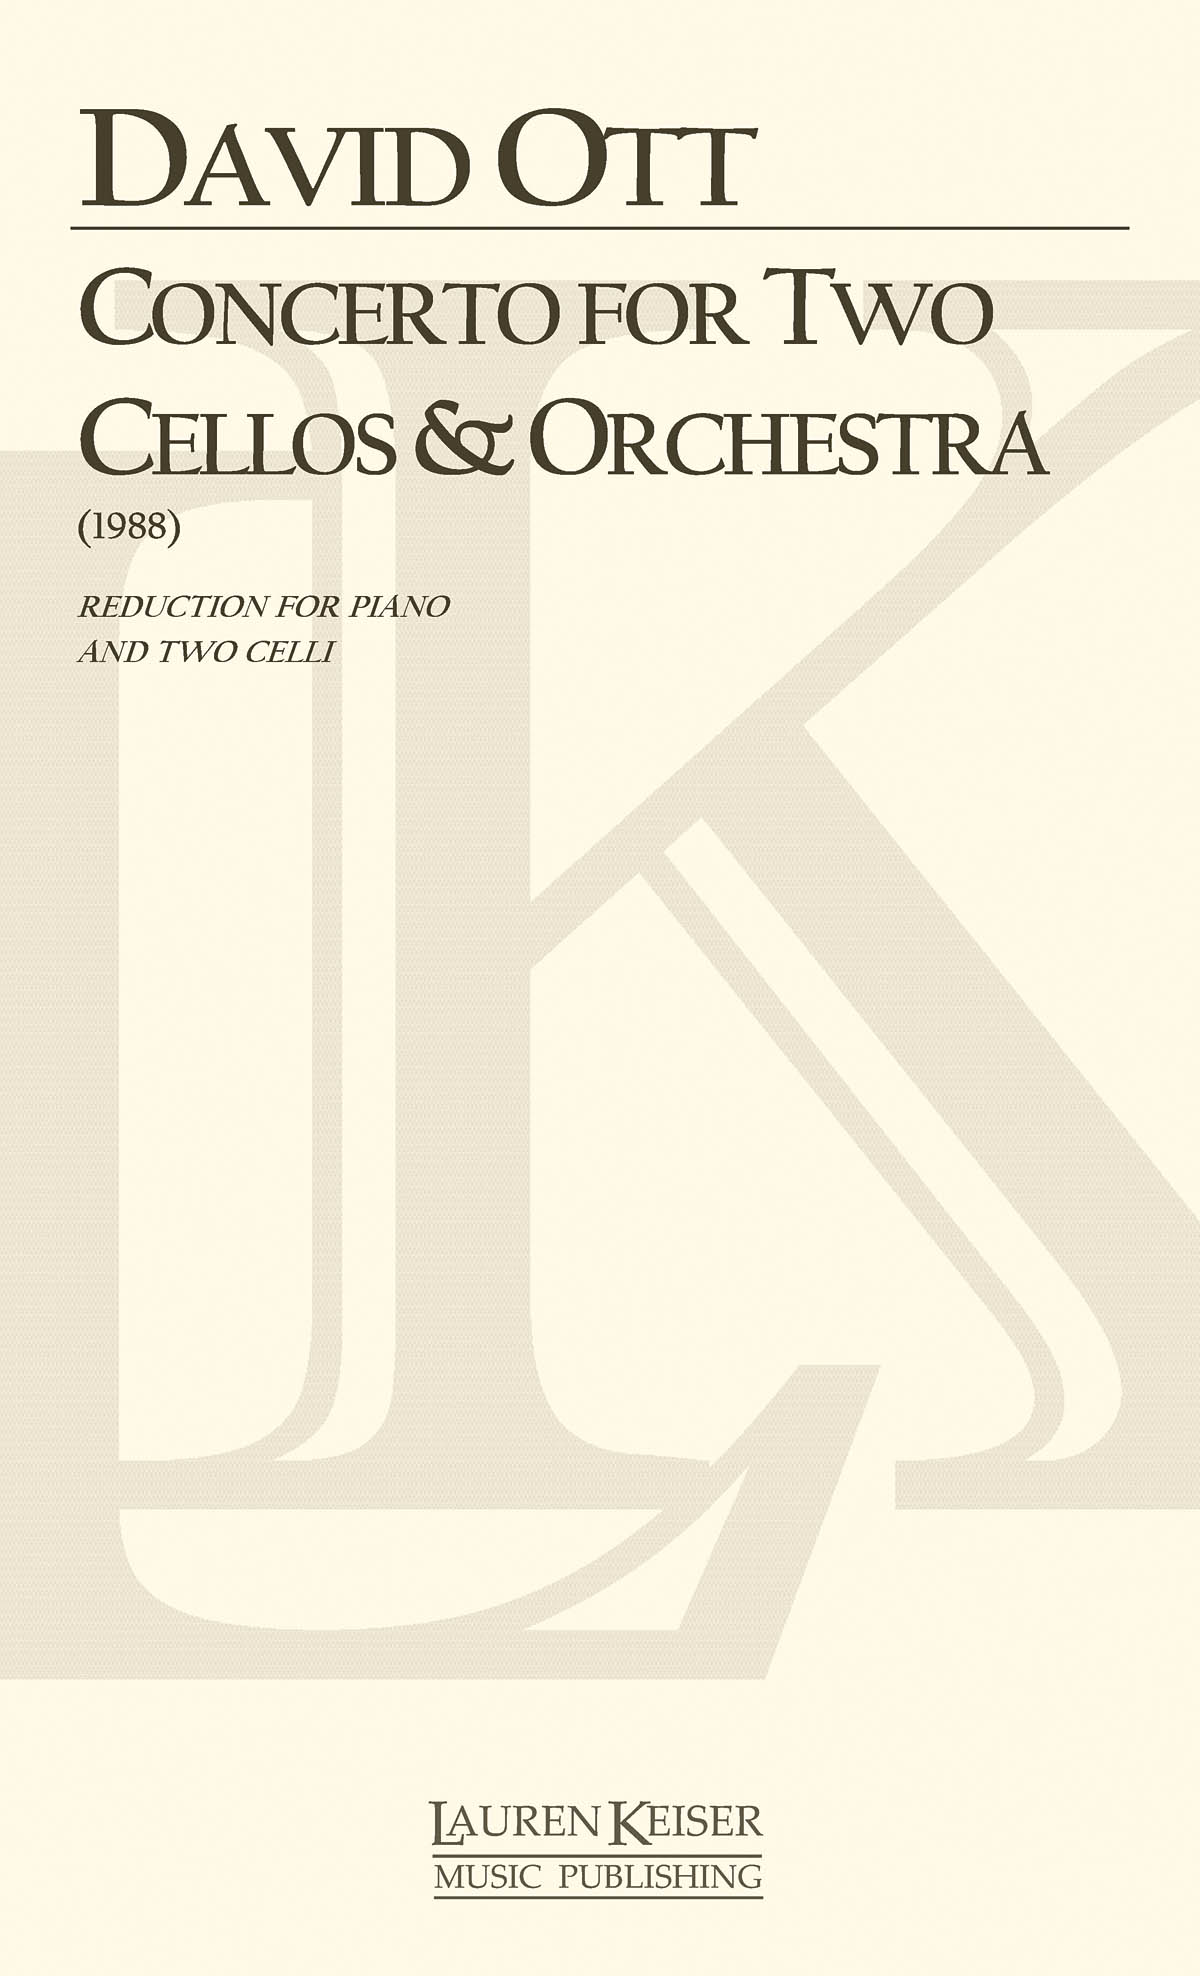 David Ott: Concerto for Two Cellos and Orchestra: Orchestra and Solo: Part